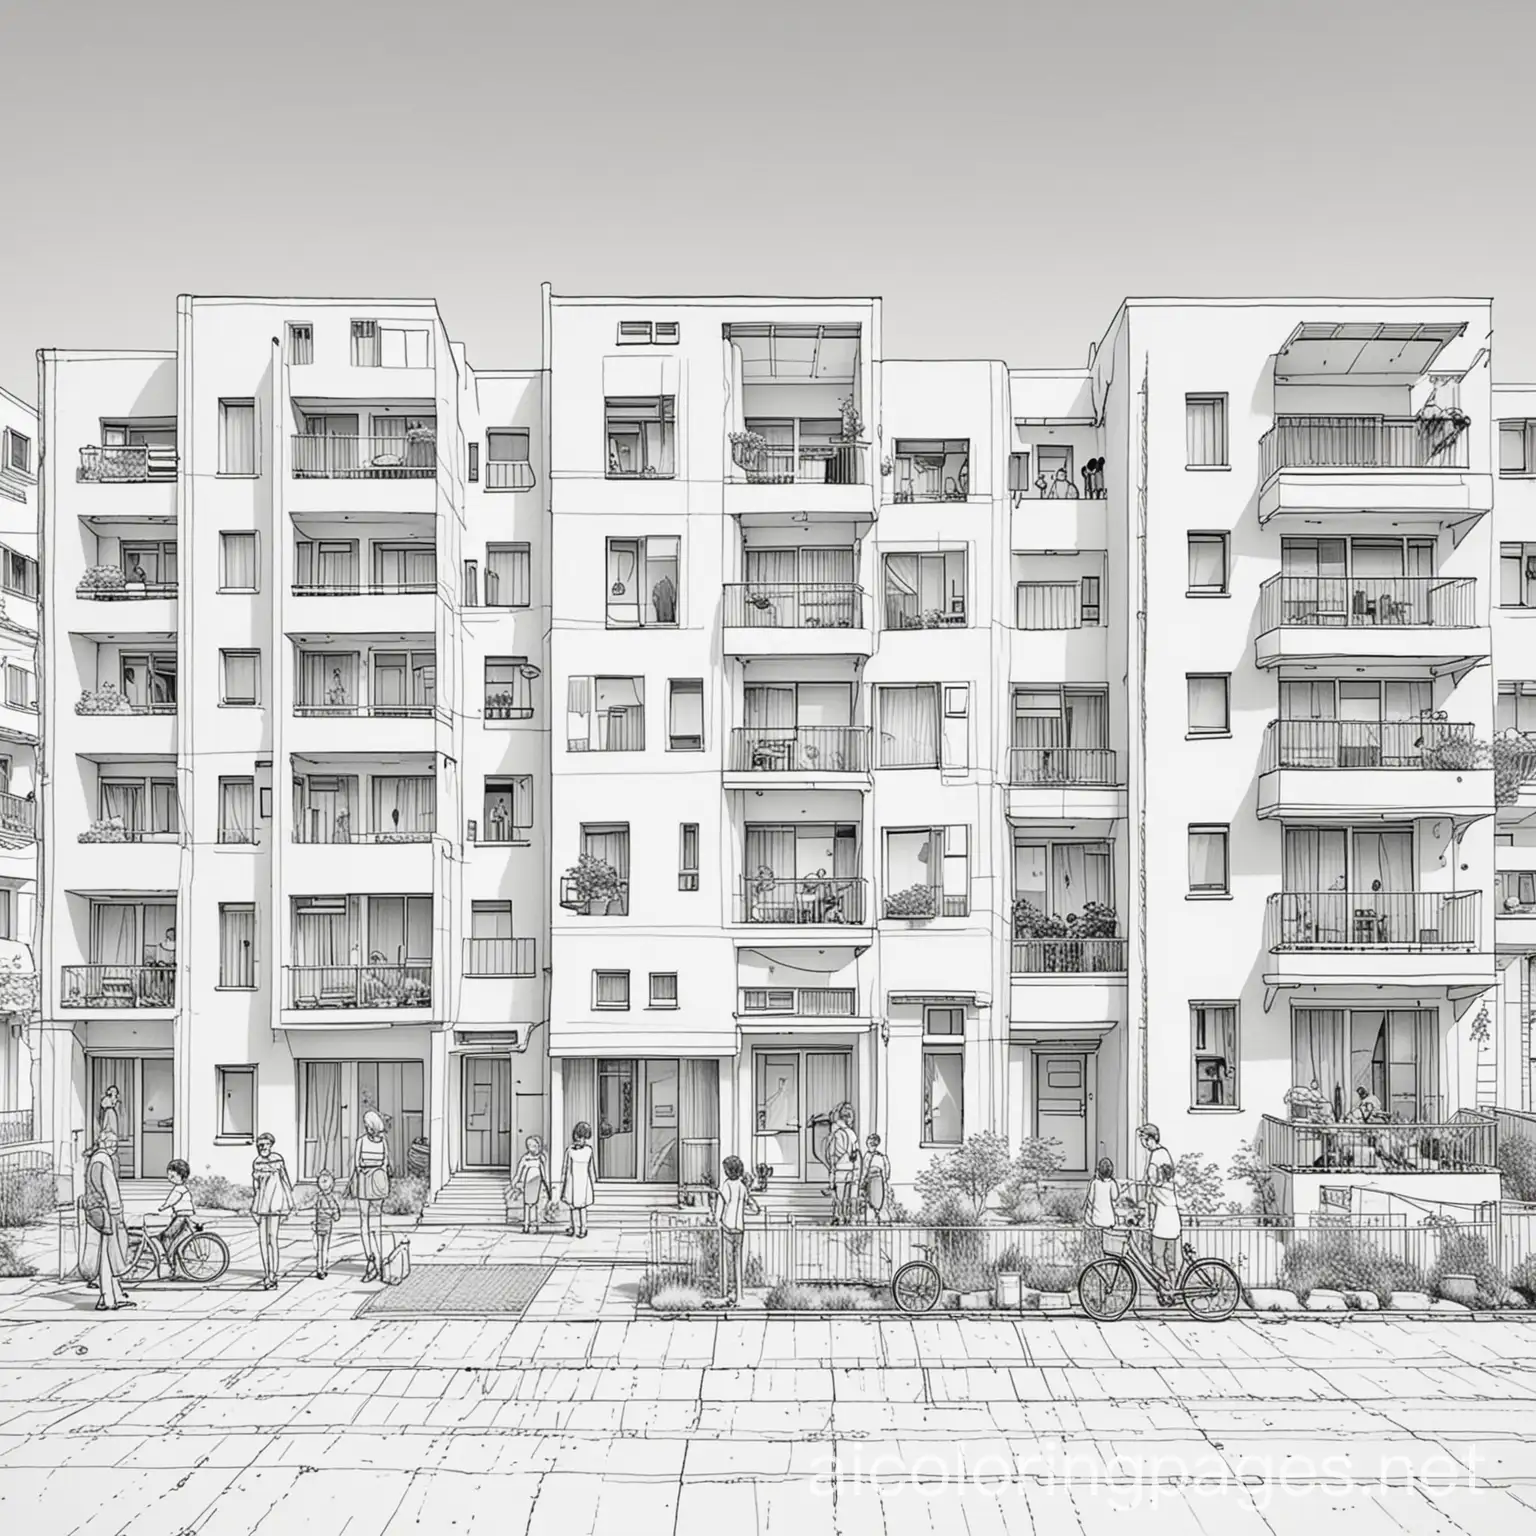 lots of modern apartments buildings with people
, Coloring Page, black and white, line art, white background, Simplicity, Ample White Space. The background of the coloring page is plain white to make it easy for young children to color within the lines. The outlines of all the subjects are easy to distinguish, making it simple for kids to color without too much difficulty